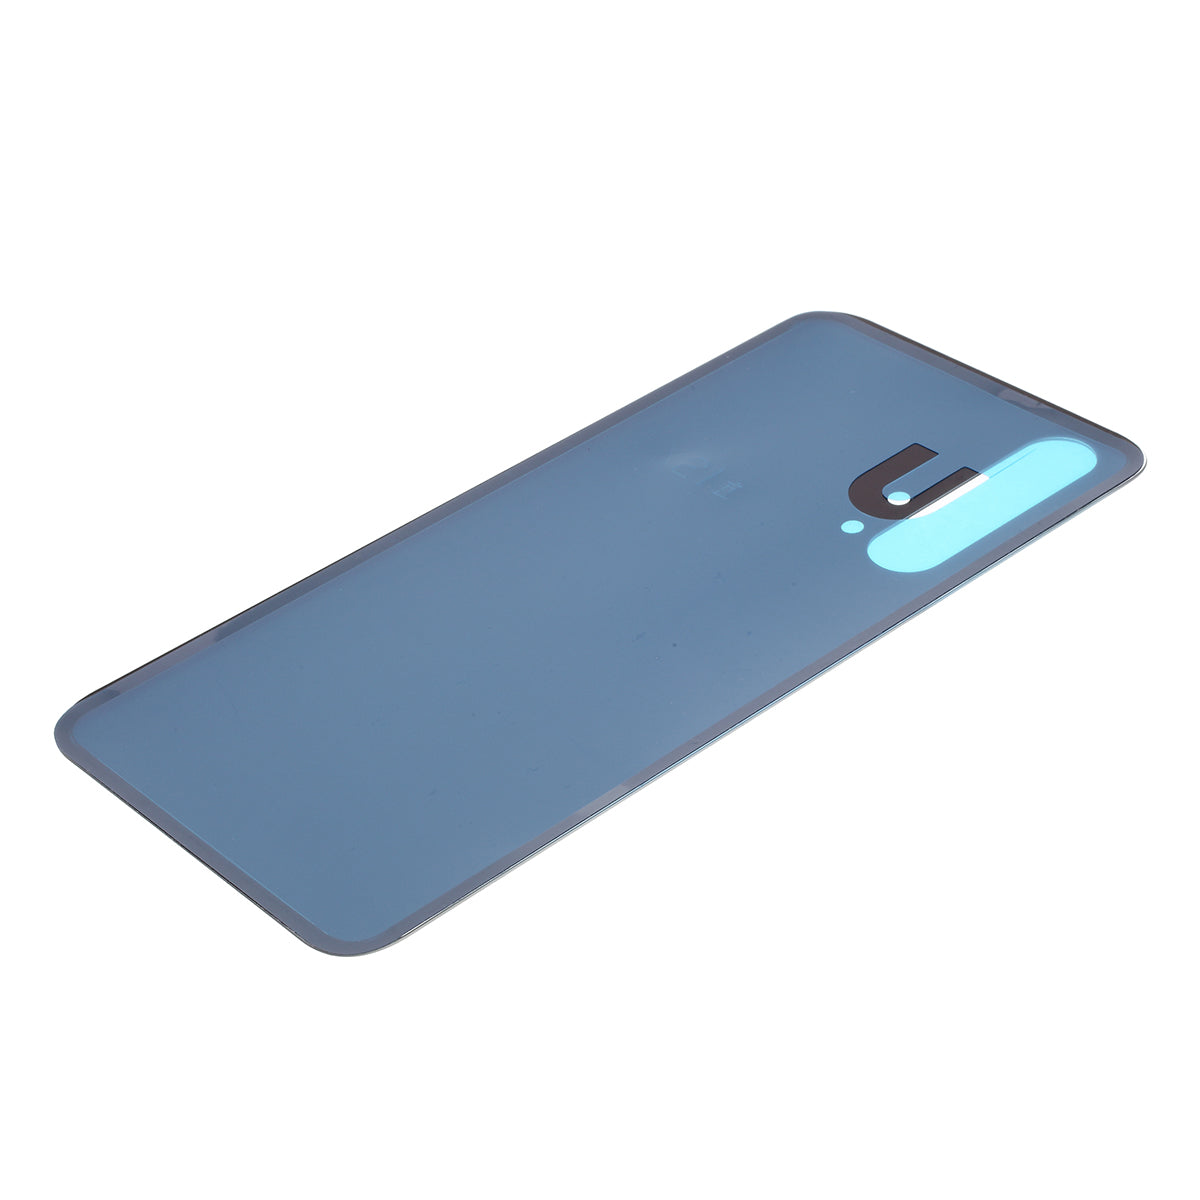 OEM Battery Housing with Adhesive Sticker for Honor 20 Pro YAL-AL10 - Blue